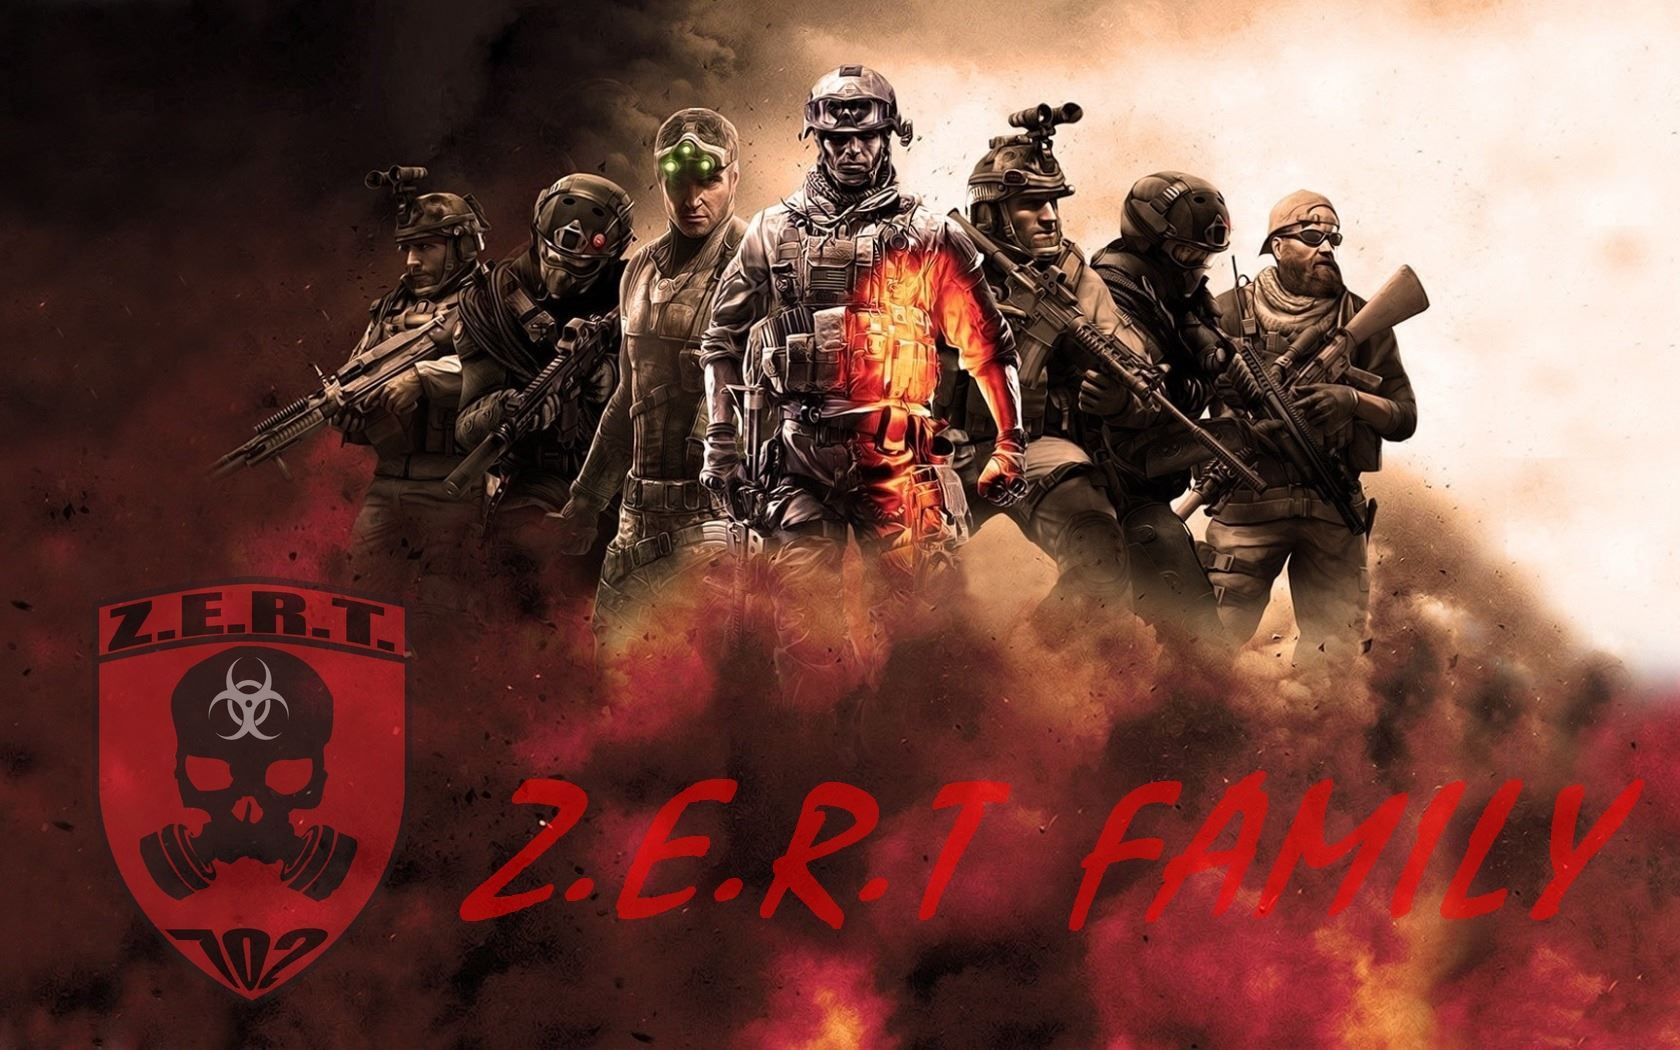 Z.E.R.T. Wallpapers